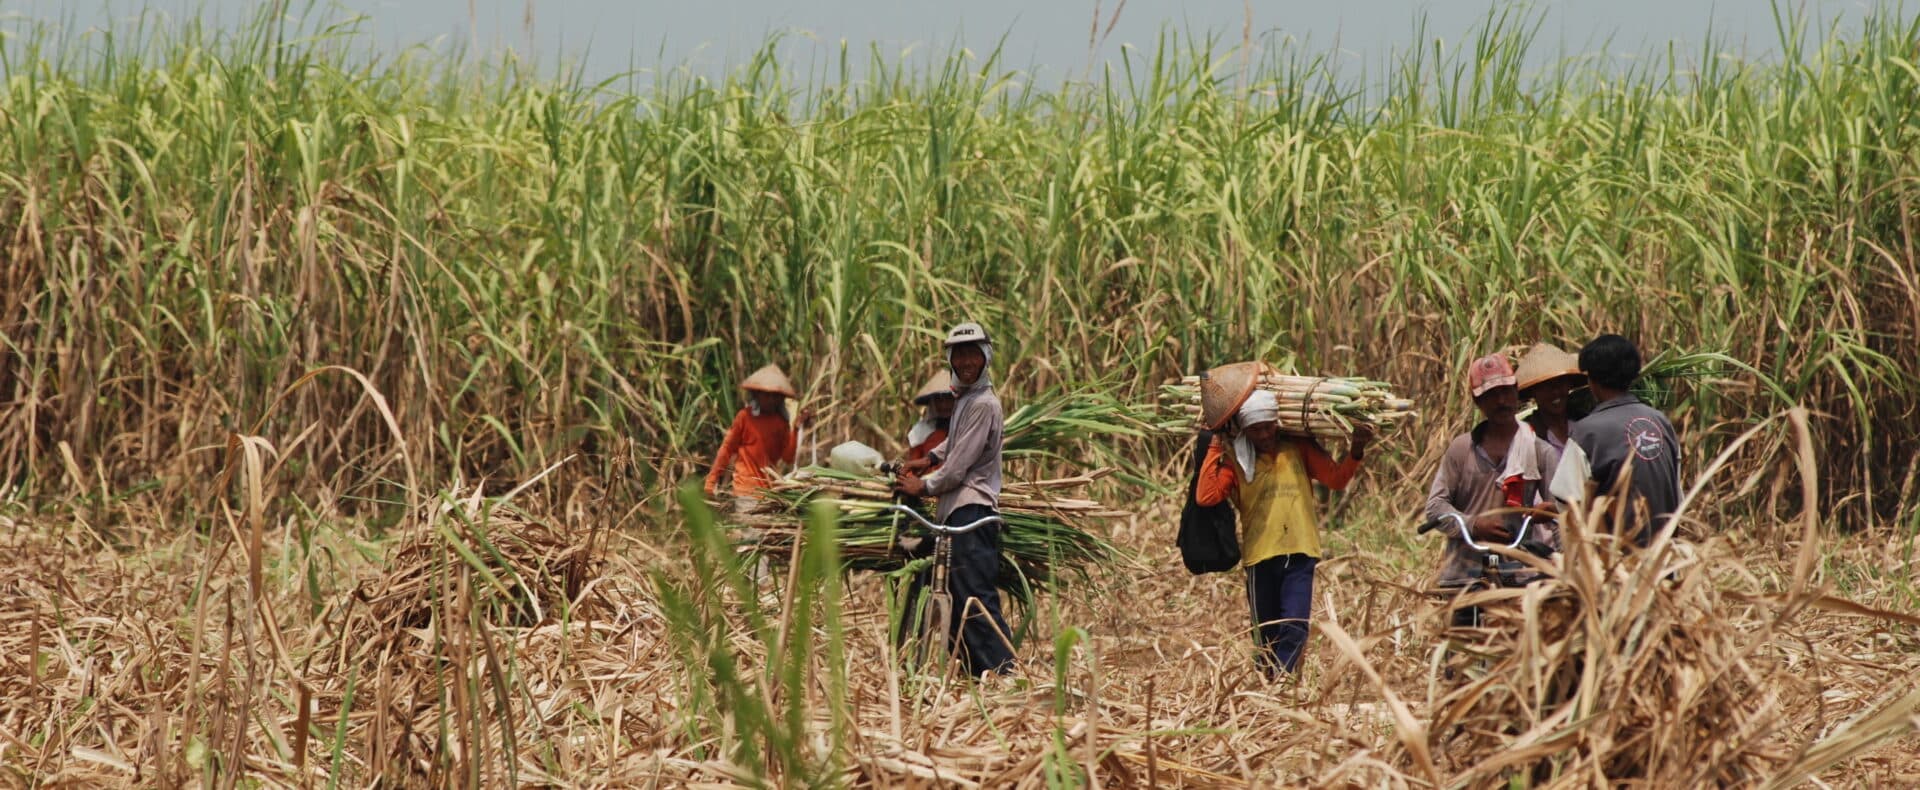 December,,2009.,workers,harvesting,and,transporting,sugarcane,in,field,,central